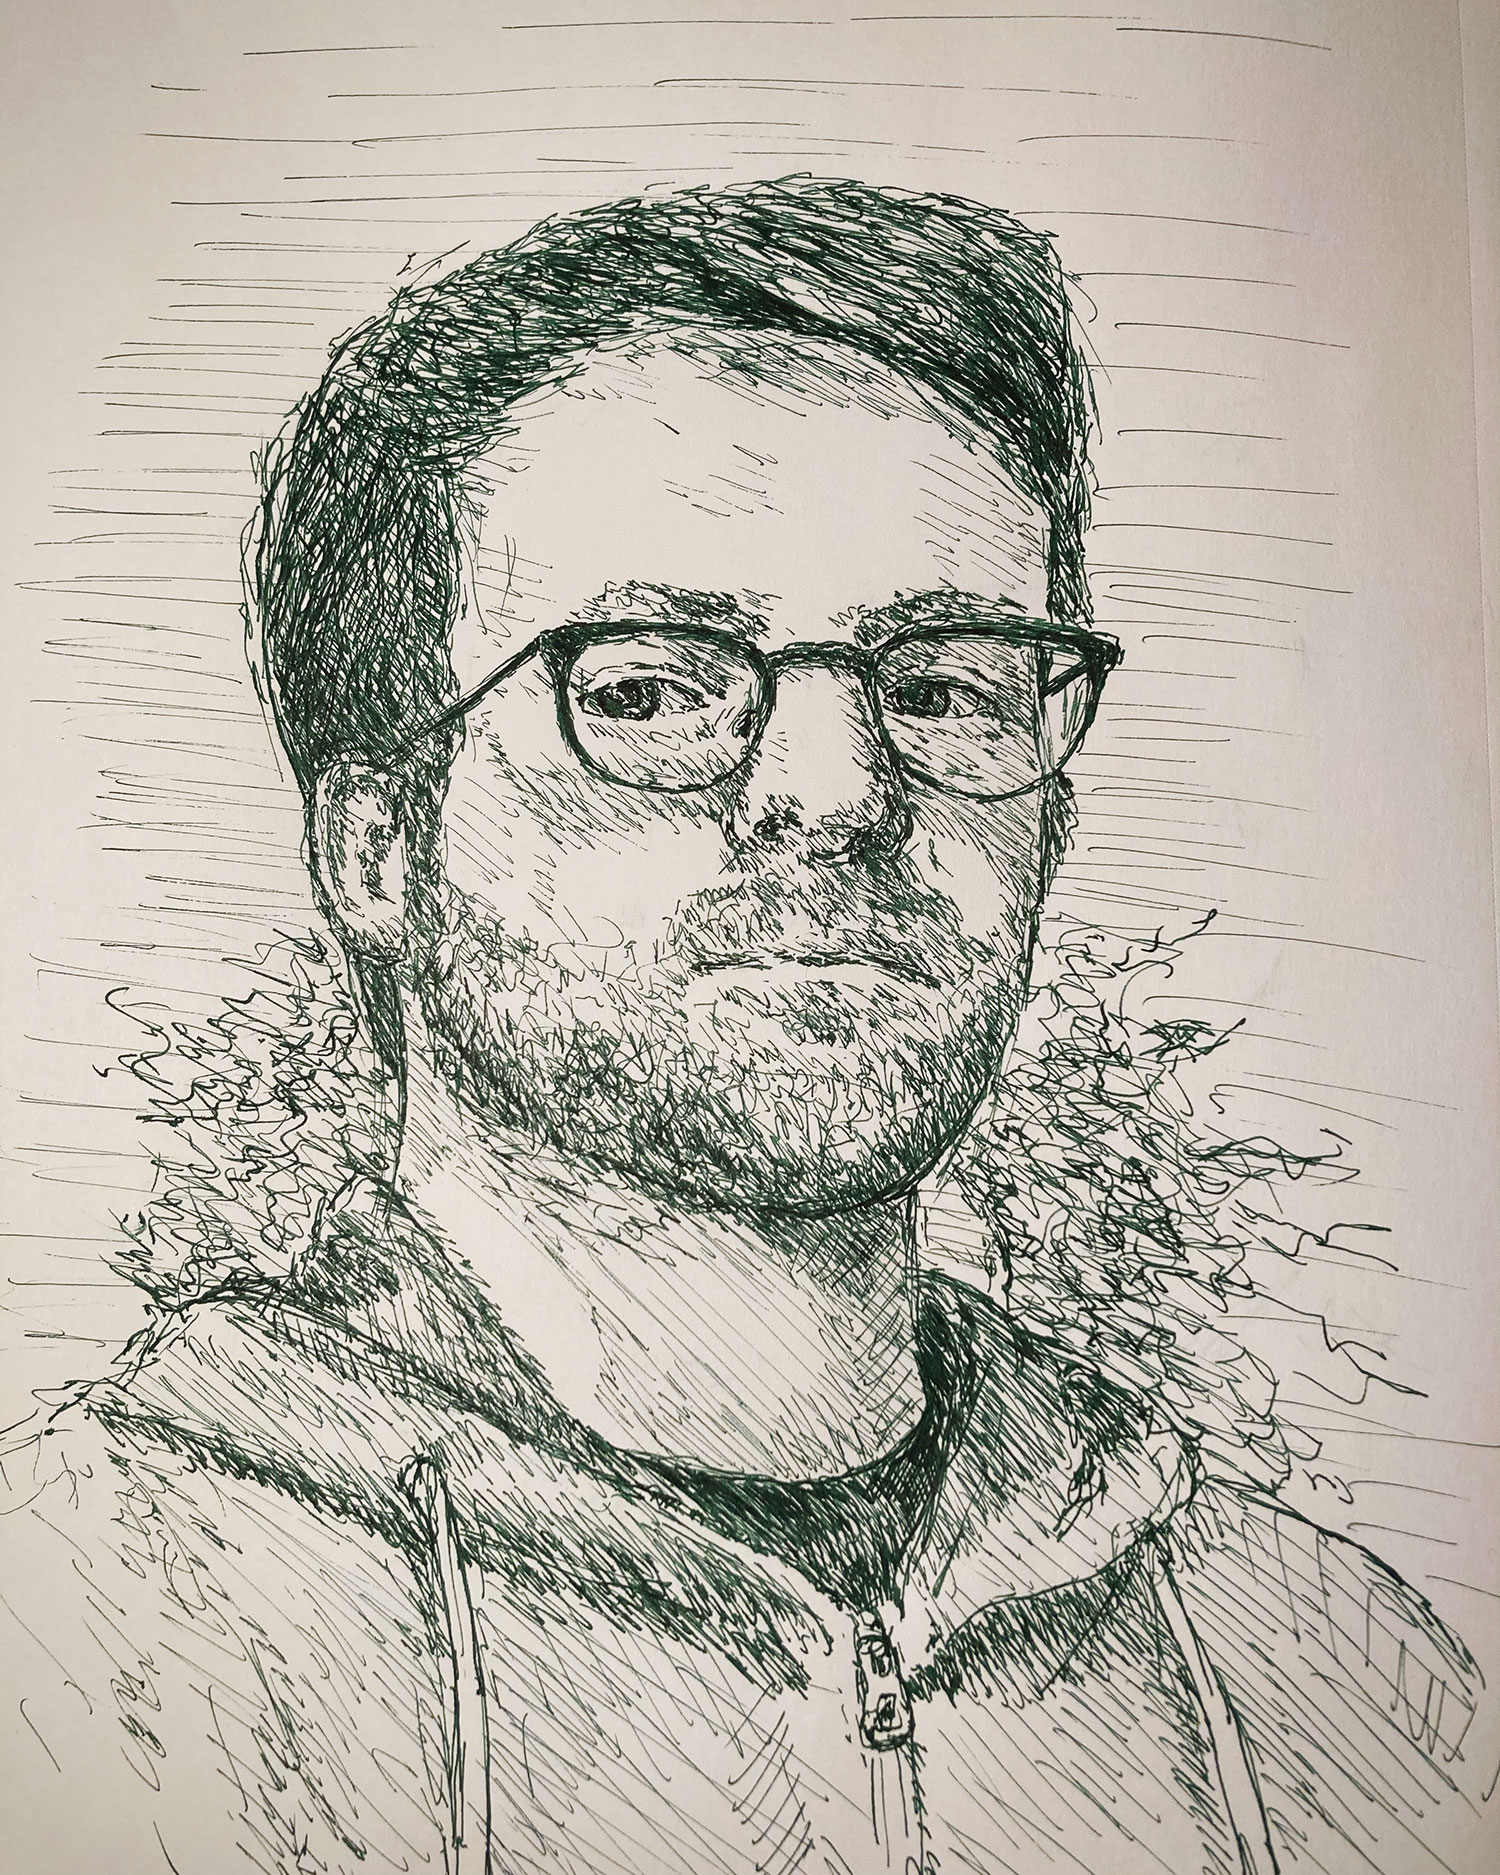 Self portrait in green ink. Every noble needs at least a few portraits, right?